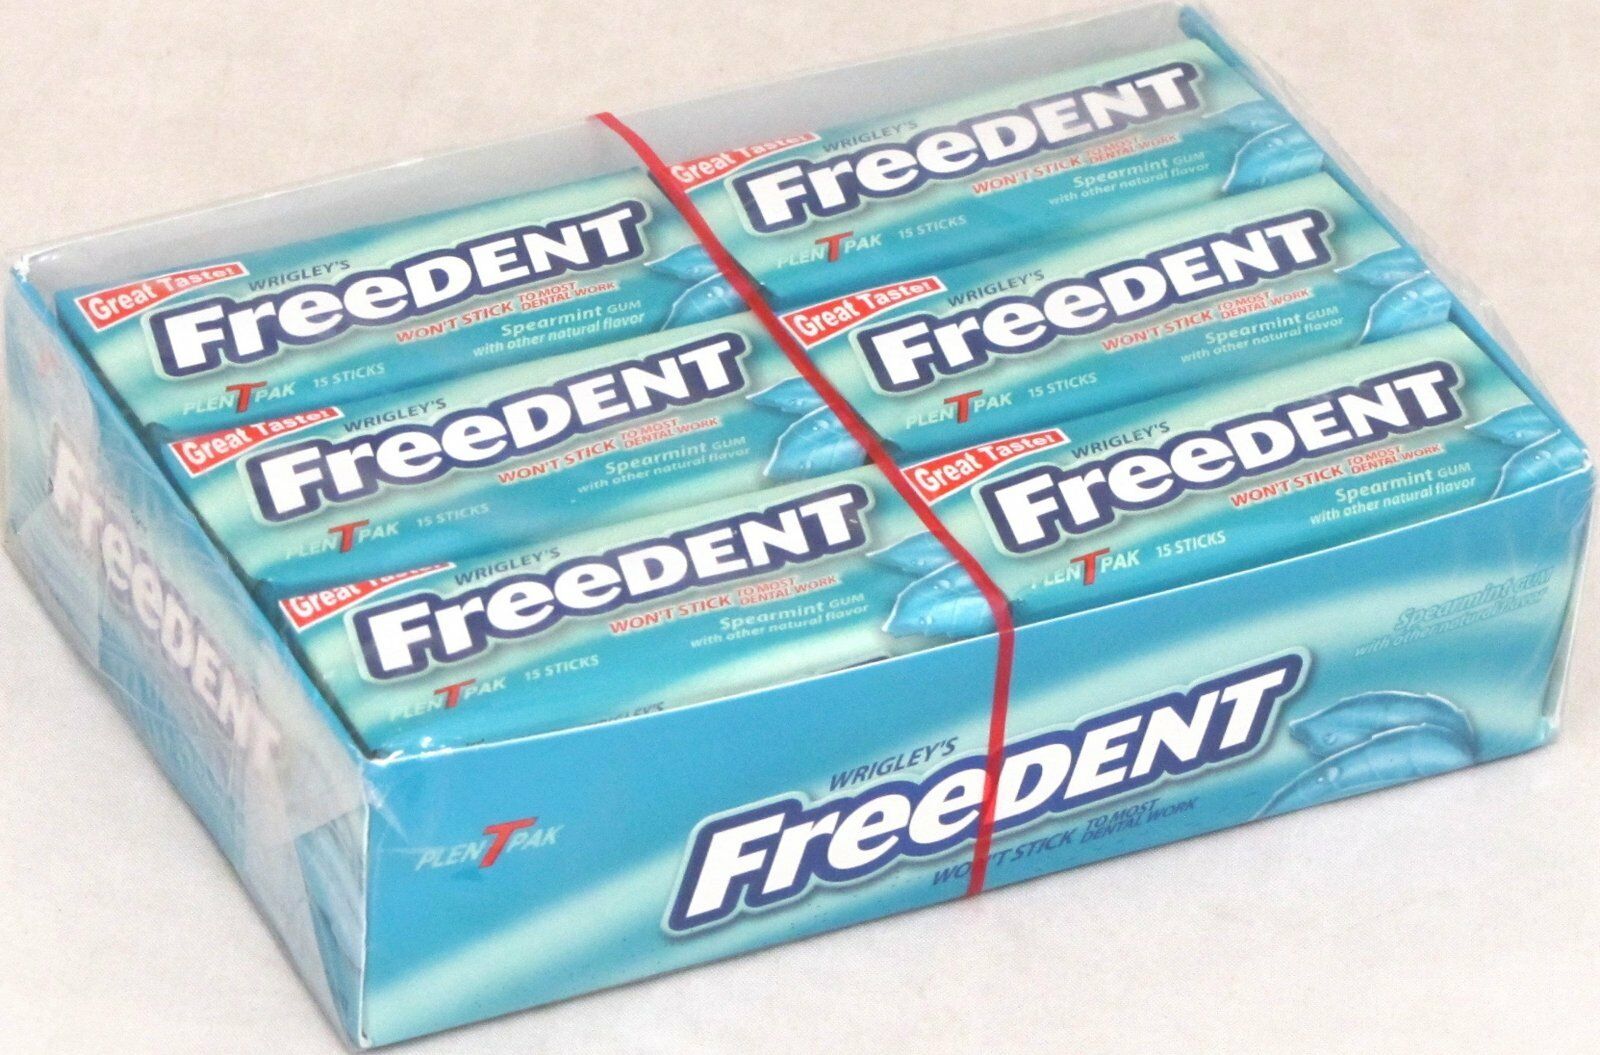 Wrigley's Freedent Spearmint Bubble Gum Candy (15 Stick Packs) Case of 12 Packs